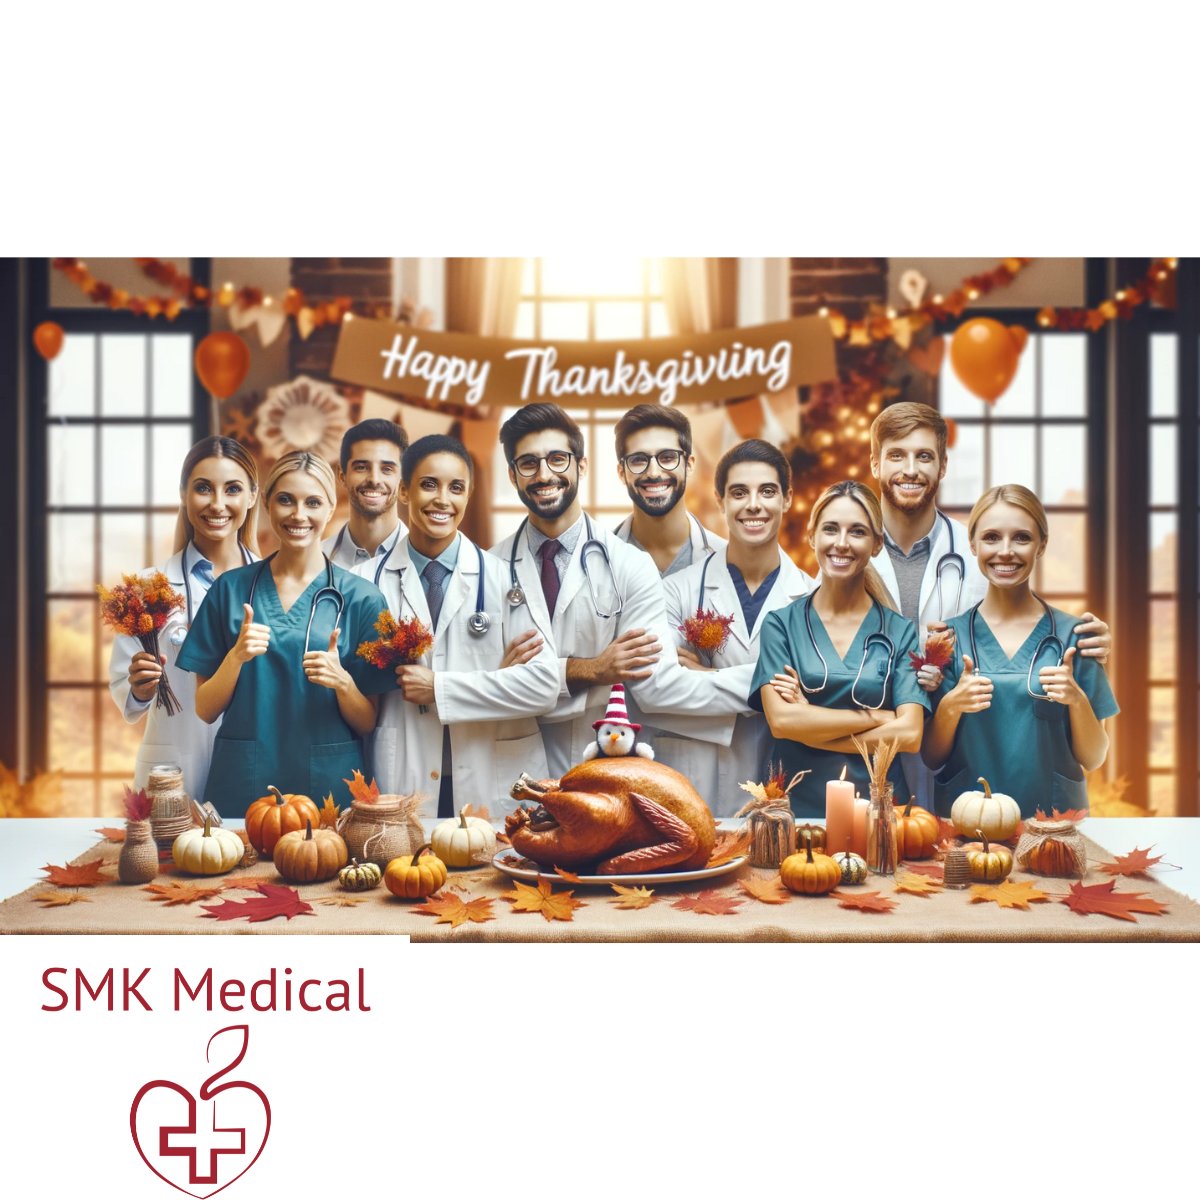 🙏 We'd also love to hear from you! What are you most thankful for this year? Share your stories of gratitude and joy with us.

💙 #ThanksHealthHeroes #SMKMedicalCares #ThanksgivingGratitude